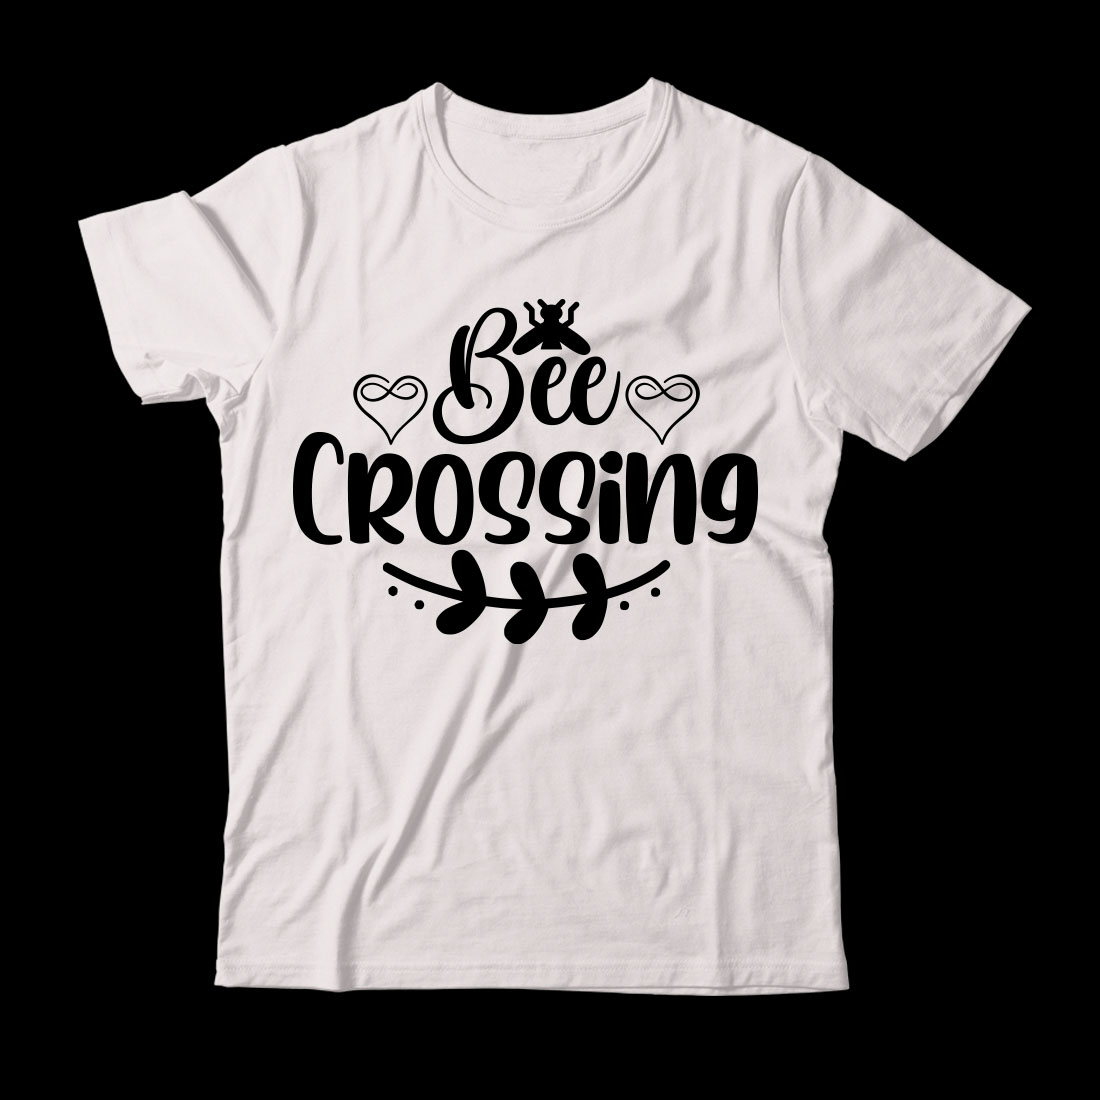 White t - shirt that says bee crossing.